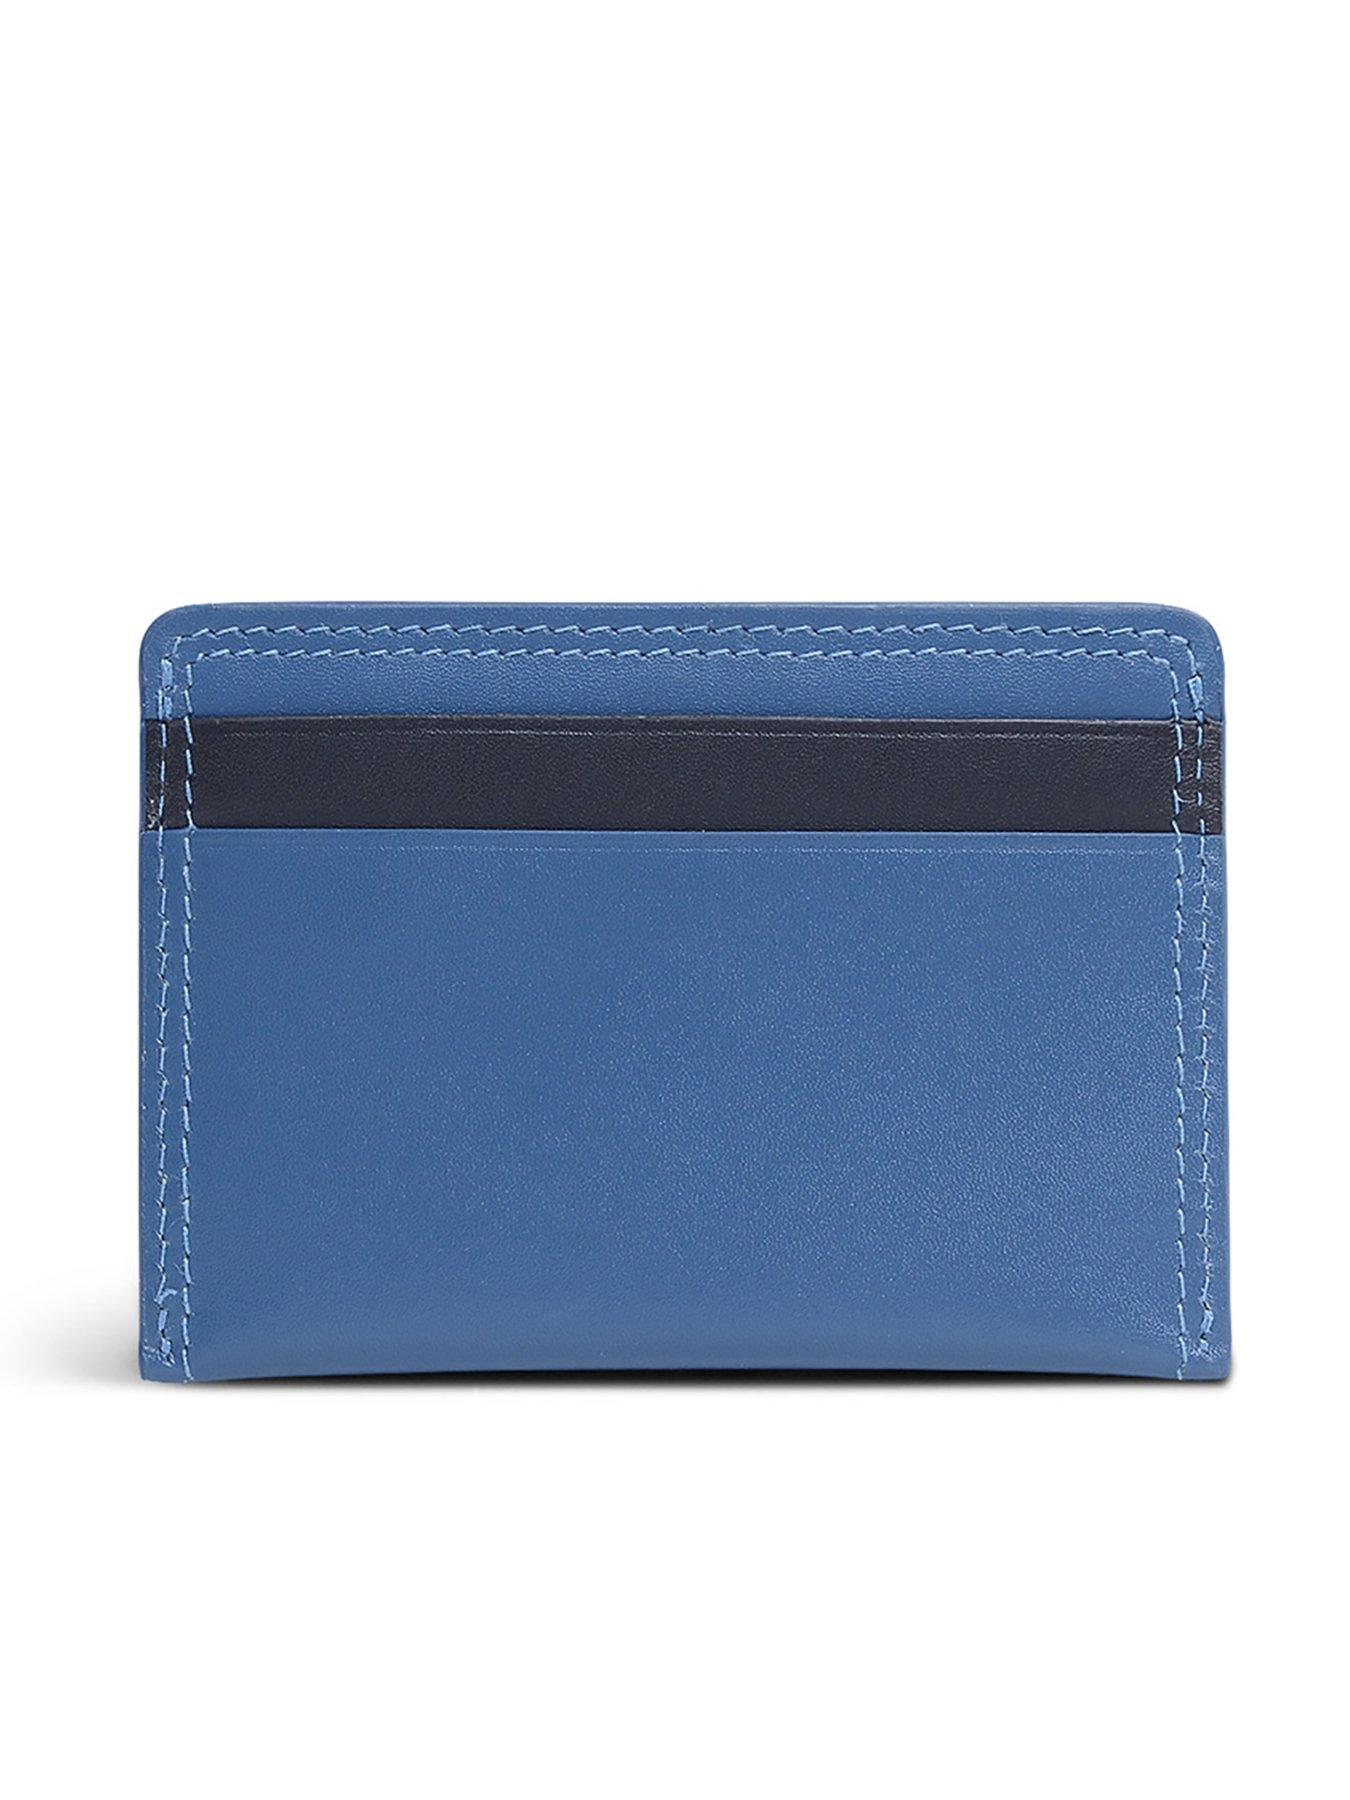  Moon Dog Leather Small Cardholder - Teal